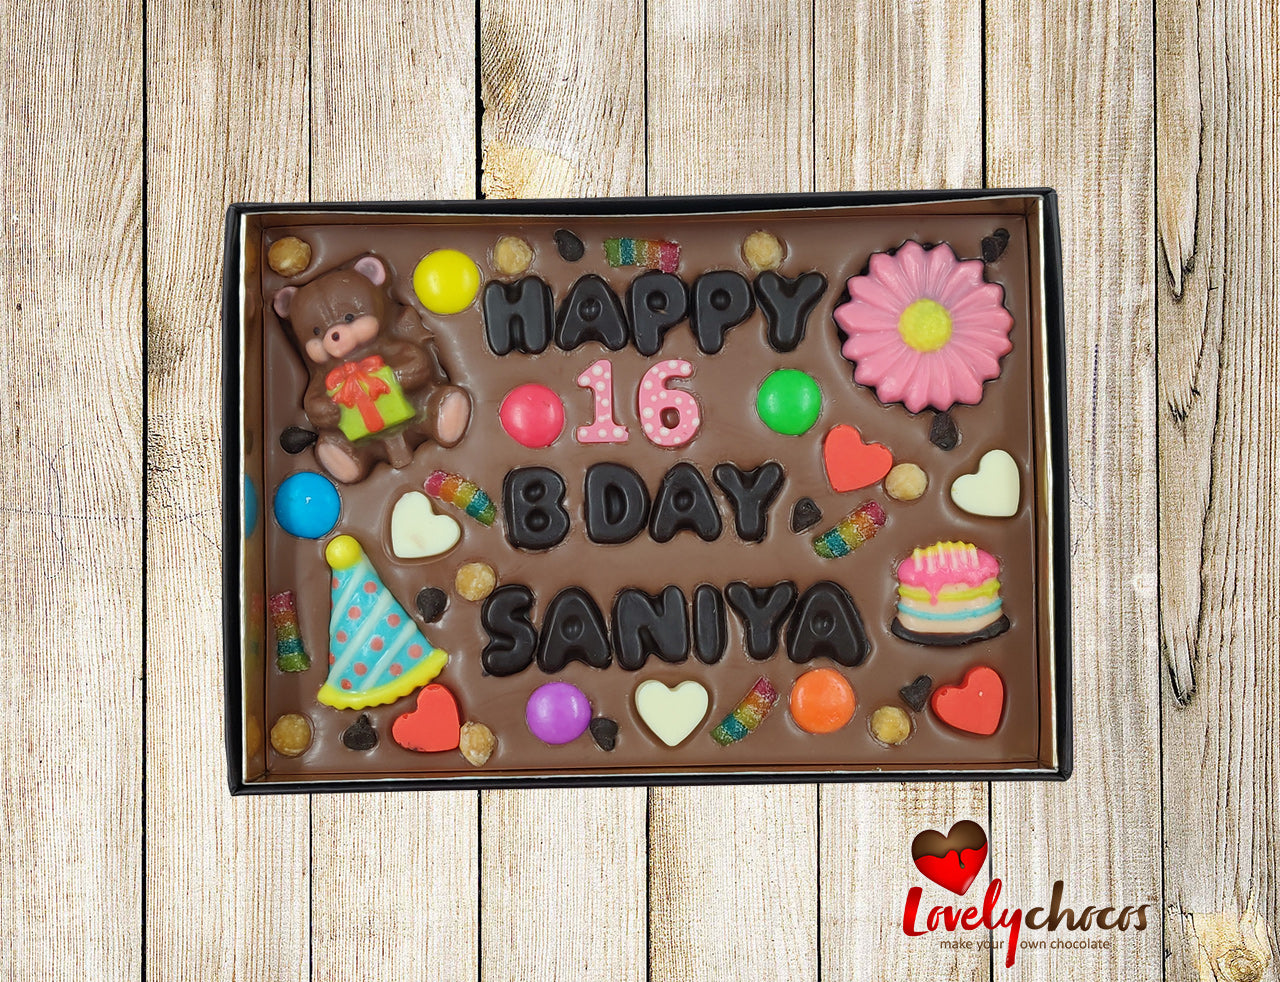 Happy Birthday Sania Image Wishes Lovers Video Animation  YouTube